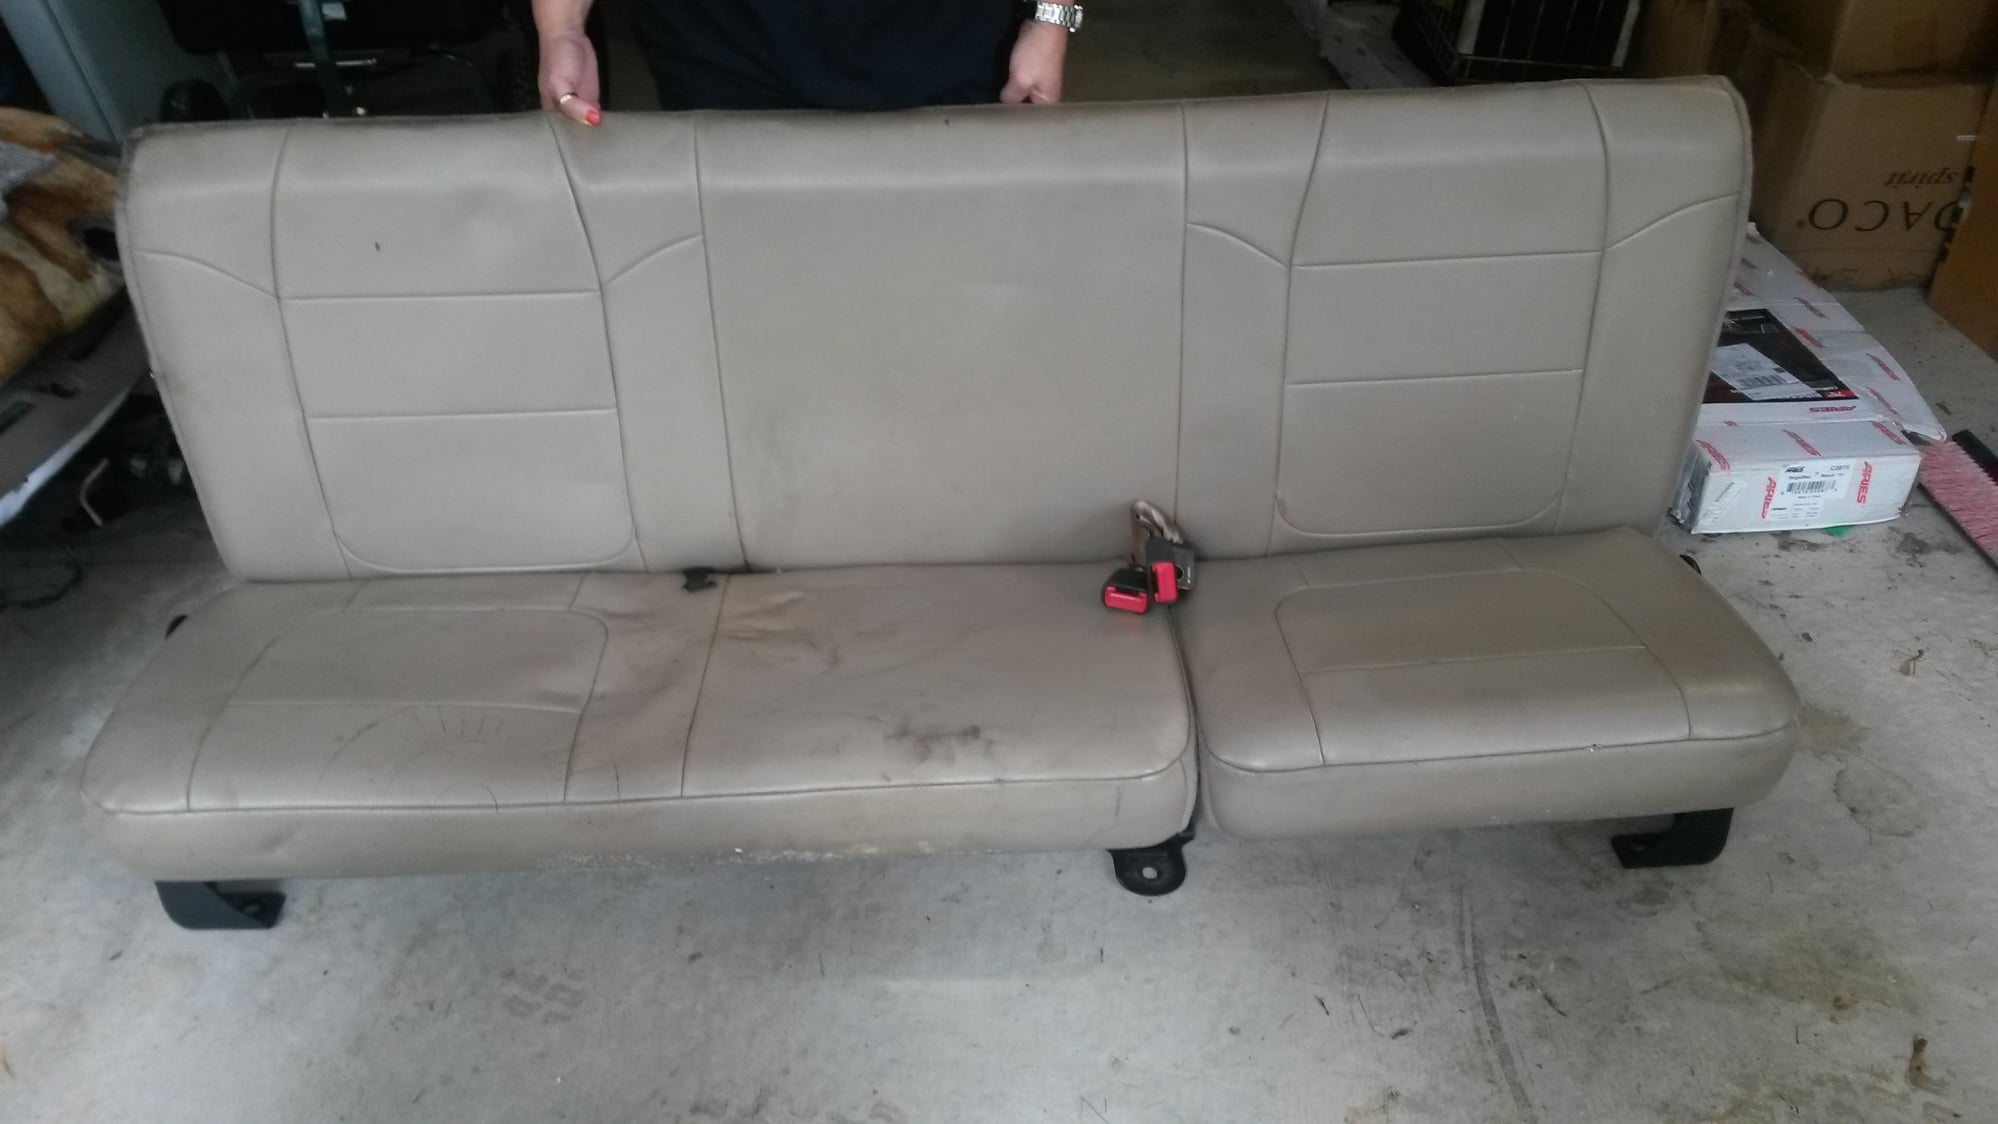 Interior/Upholstery - 2003 Ford Super Duty, Super Cab XLT Lariet Leather Interior, Excellent Condition - Used - 1999 to 2007 Ford F-250 Super Duty - Tinley Park, IL 60477, United States